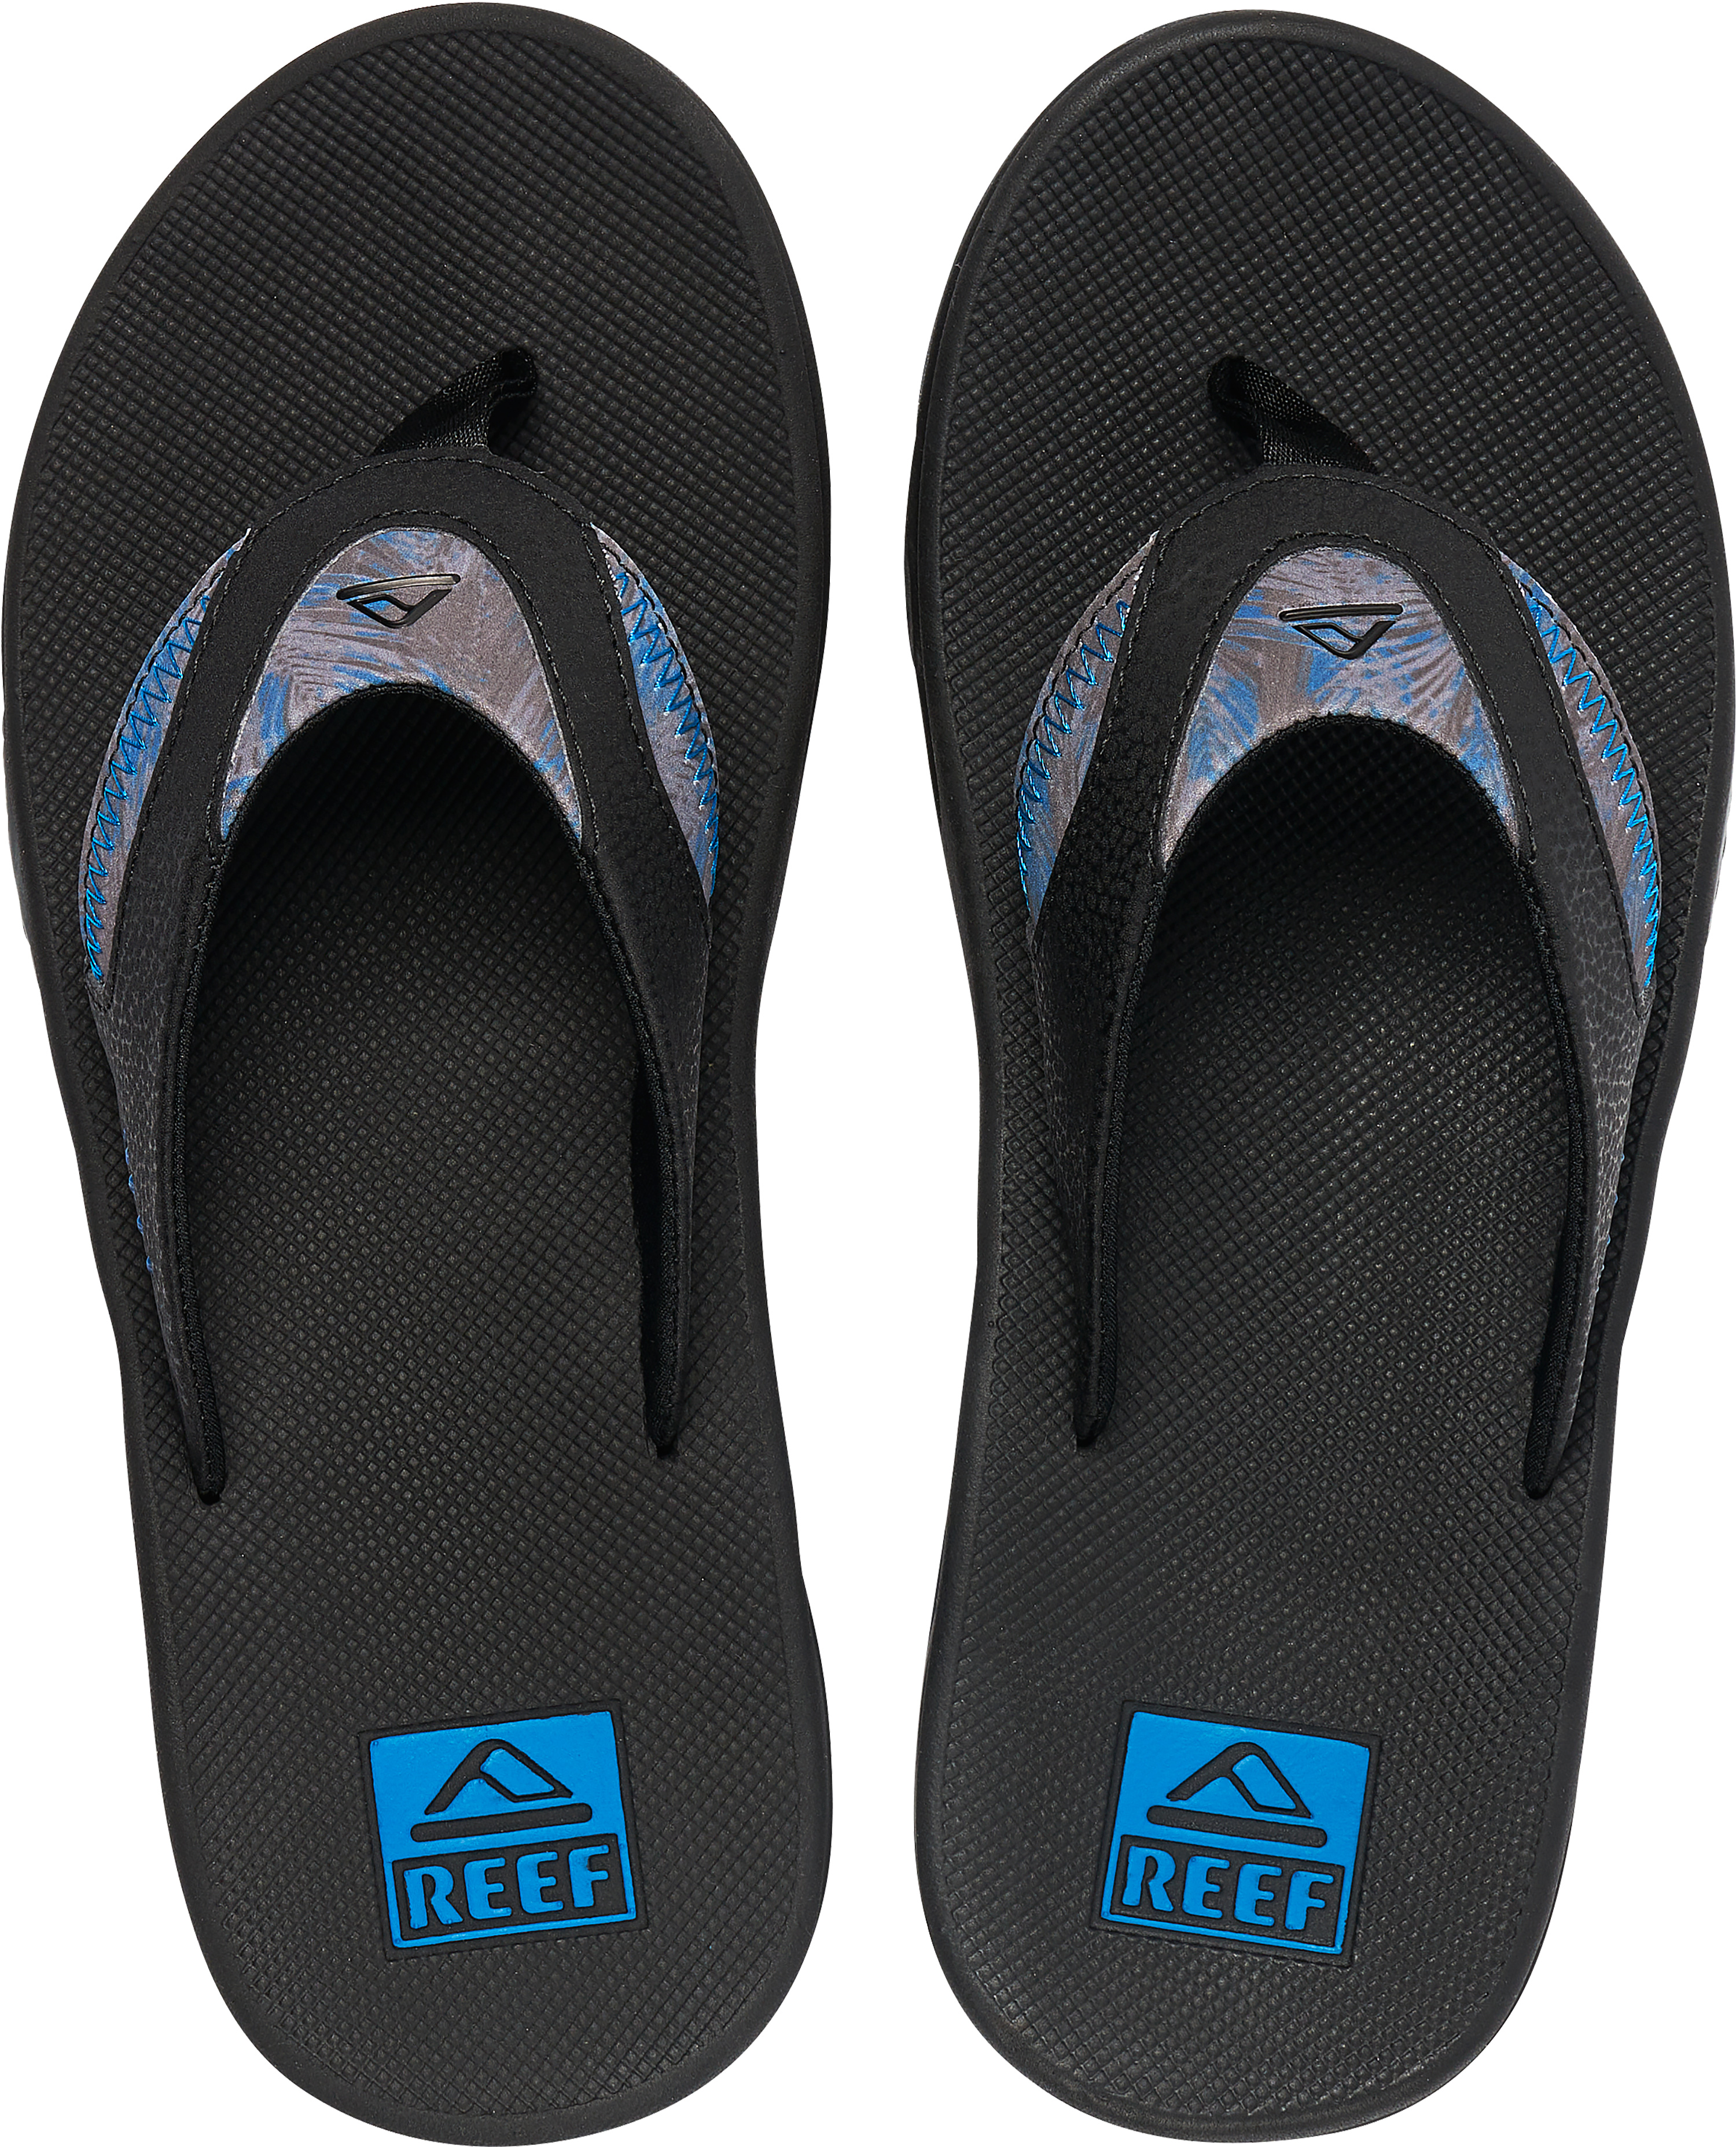 Reef Fanning Flip Flops | UK Stock, Shipped from Cornwall.